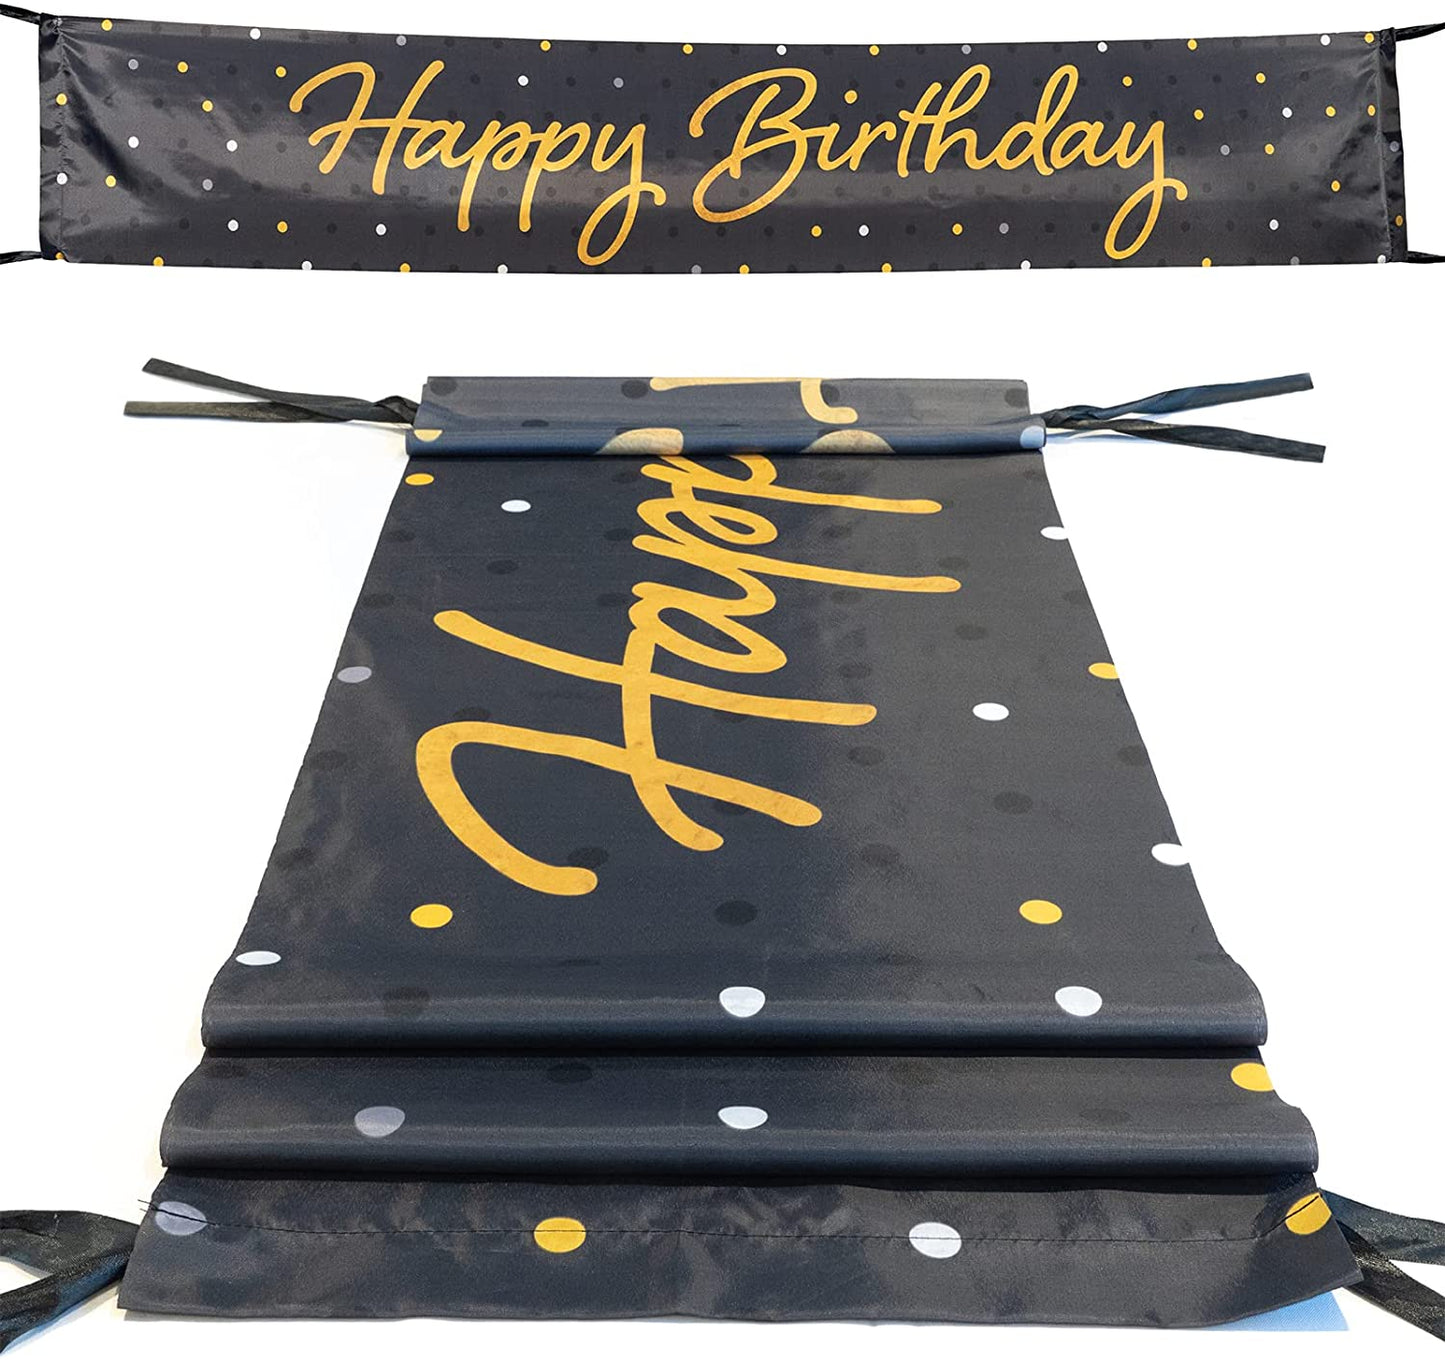 Happy Birthday Yard Sign Banner, 117 x 19 Inch, Black/Gold, Outdoor Birthday Decorations for Lawn, Fence and Trees, Durable Polyester Cloth Material